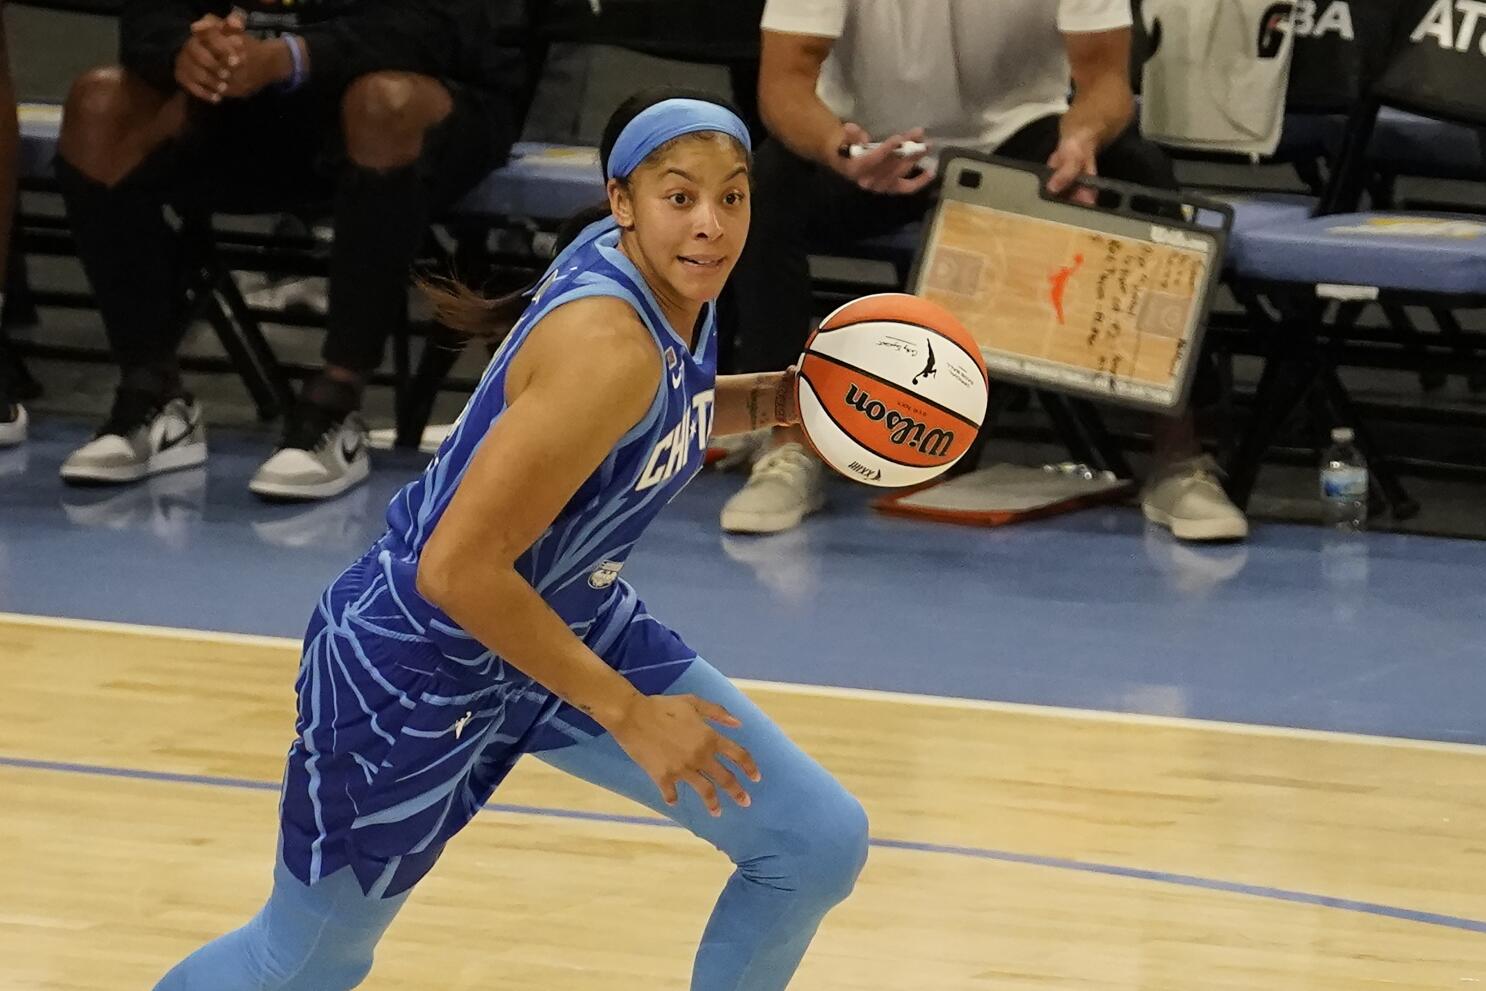 Candace Parker becomes first female cover athlete in NBA2K history; Luka  Doncic joins her